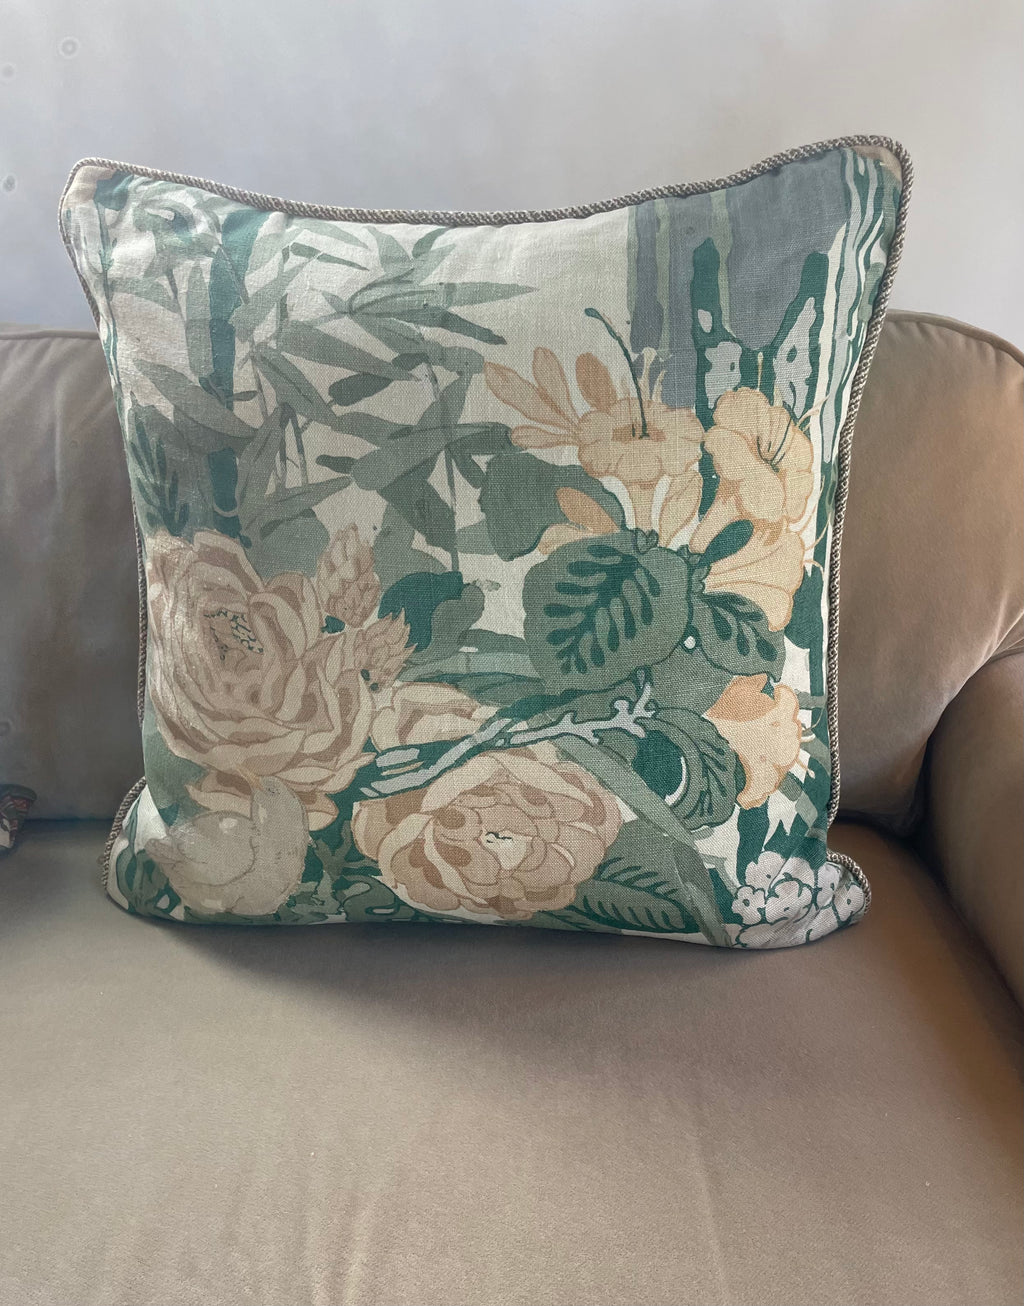 Hazelton House 'Passion For Peace' Throw Pillow. Hudson Valley NY. Pine Plains 12567